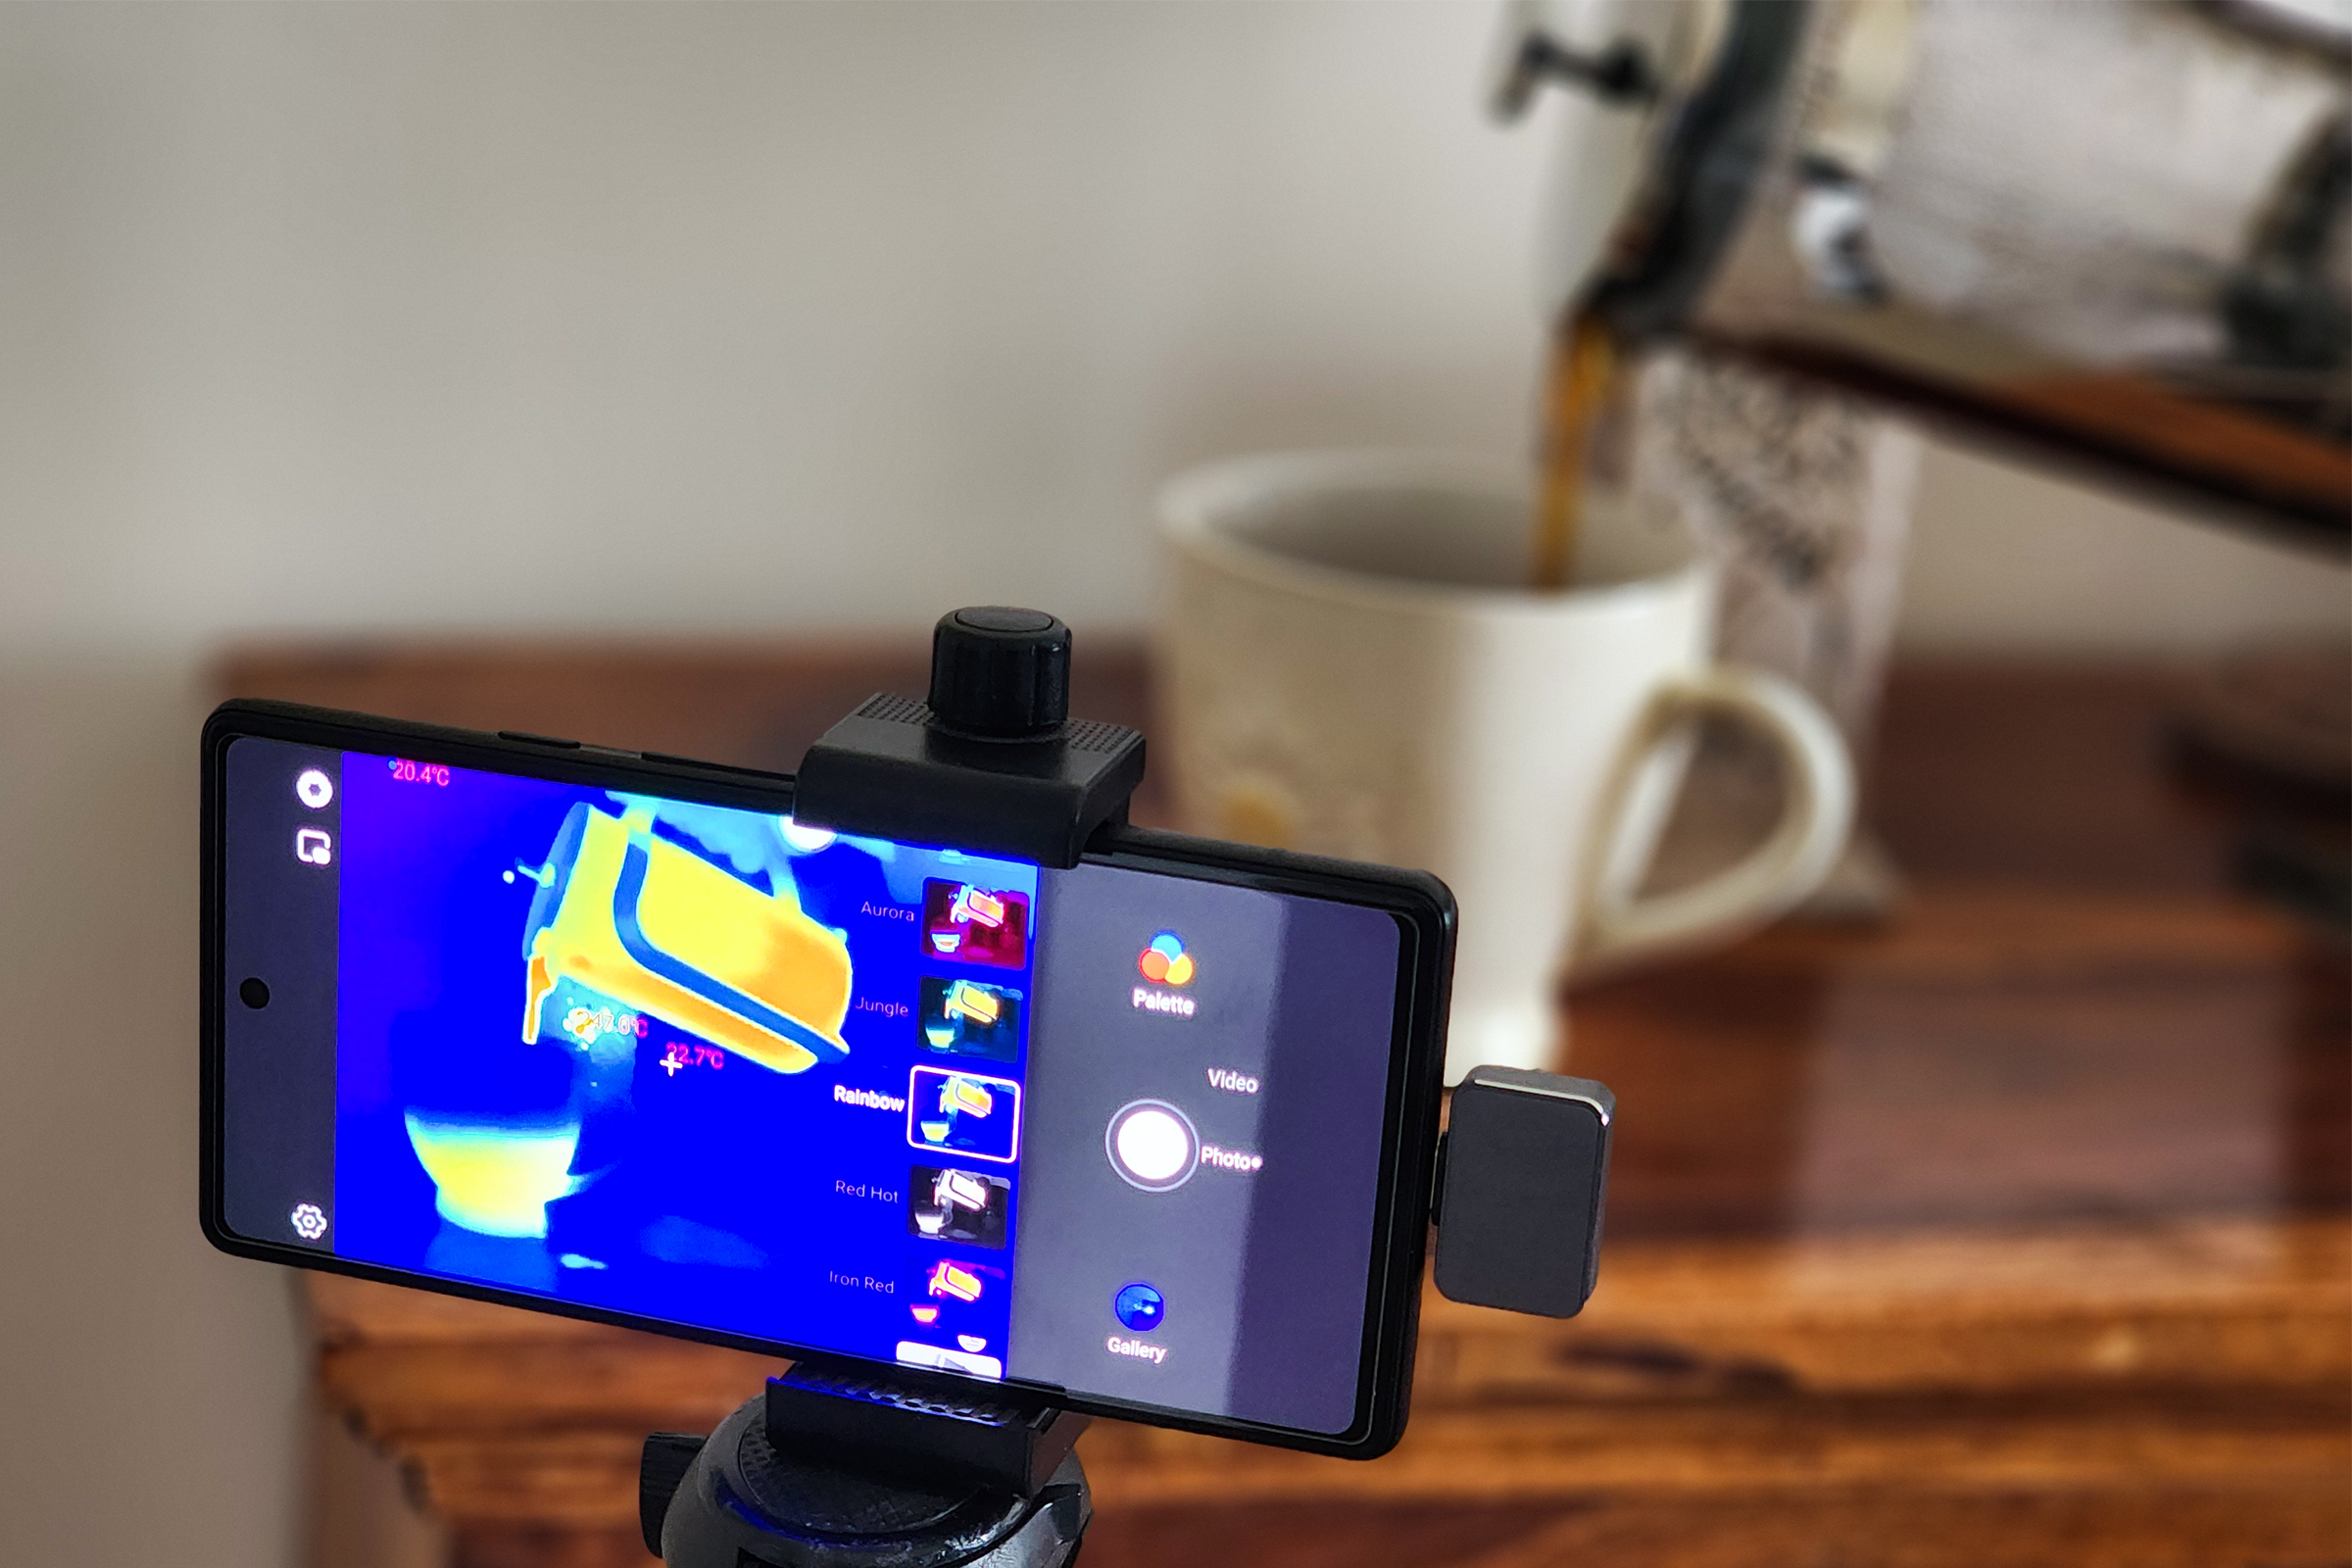 Infiniray P2Pro infrared thermal imaging camera used to see the temperature of coffee being poured from a french press into a ceramic mug.